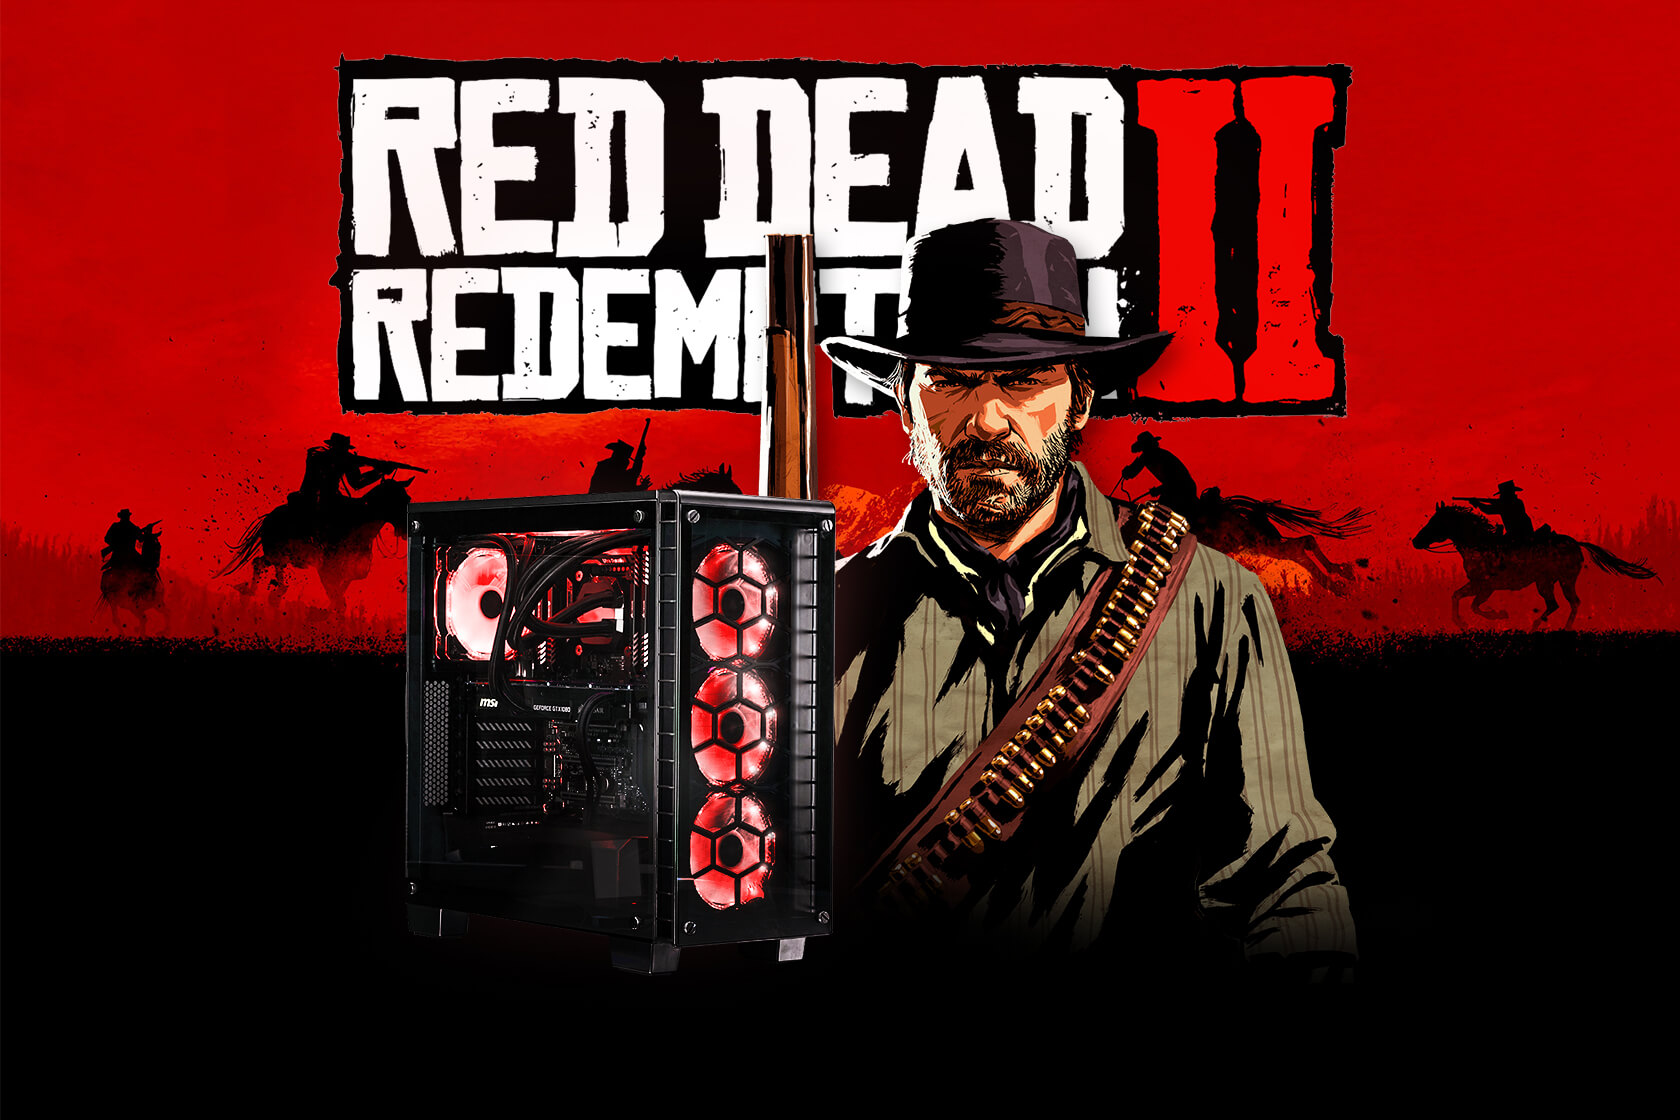 red dead redemption 2 pc free download full game torrent